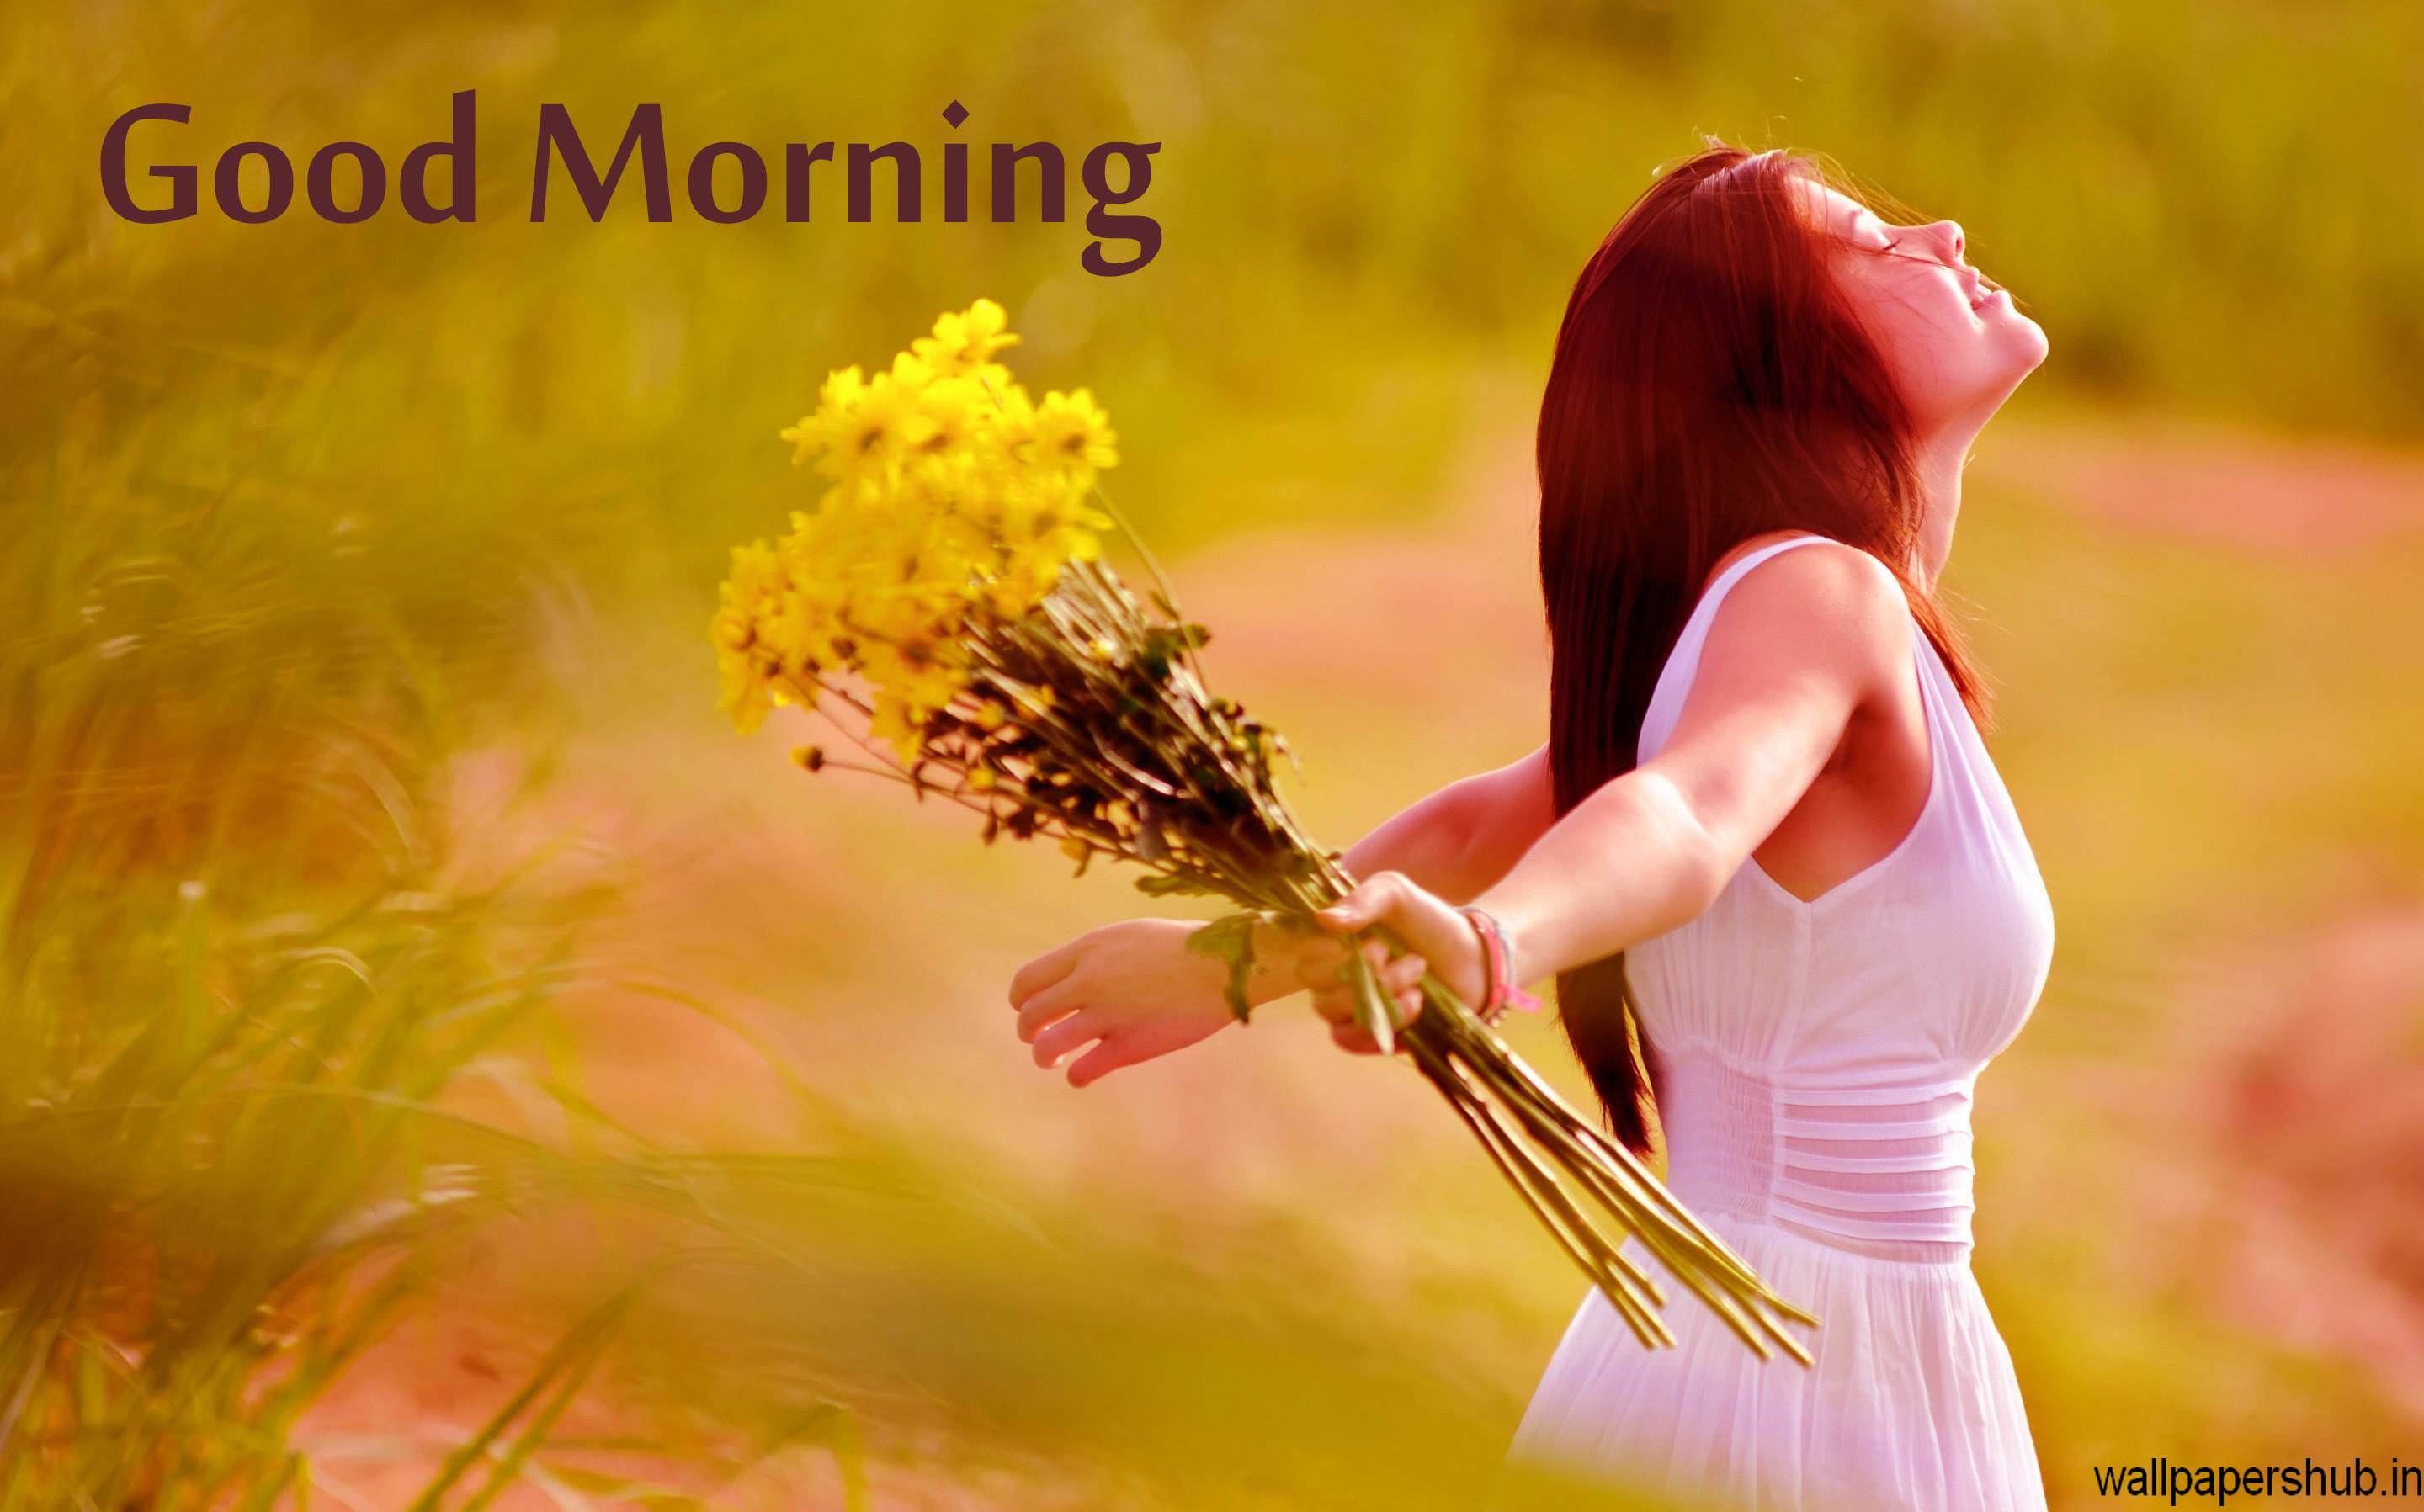 Cute Good Morning Text Messages for Her!. Good morning wallpaper